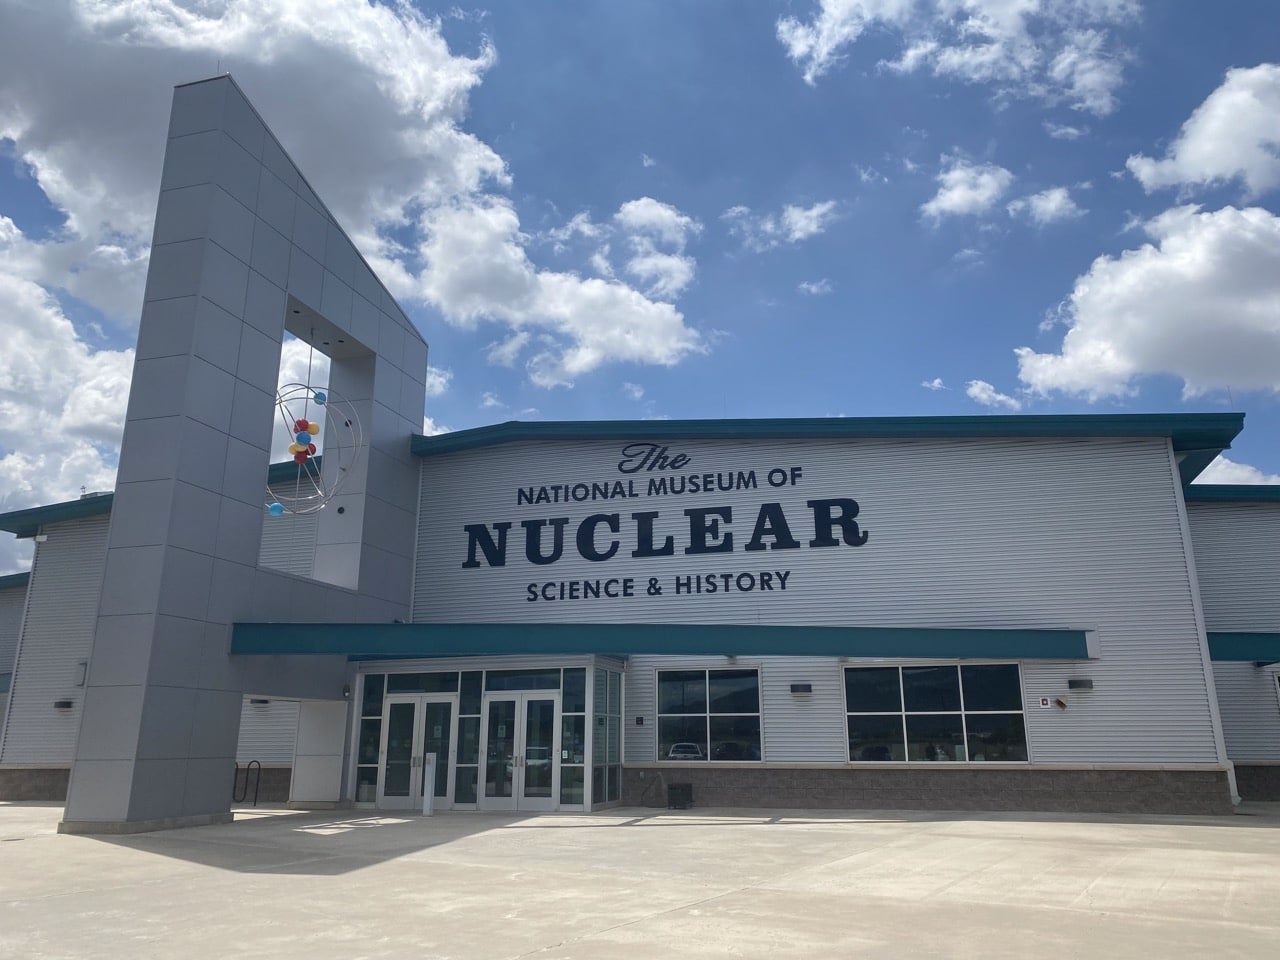 The National Museum of Nuclear Science & History in Albuquerque, New Mexico